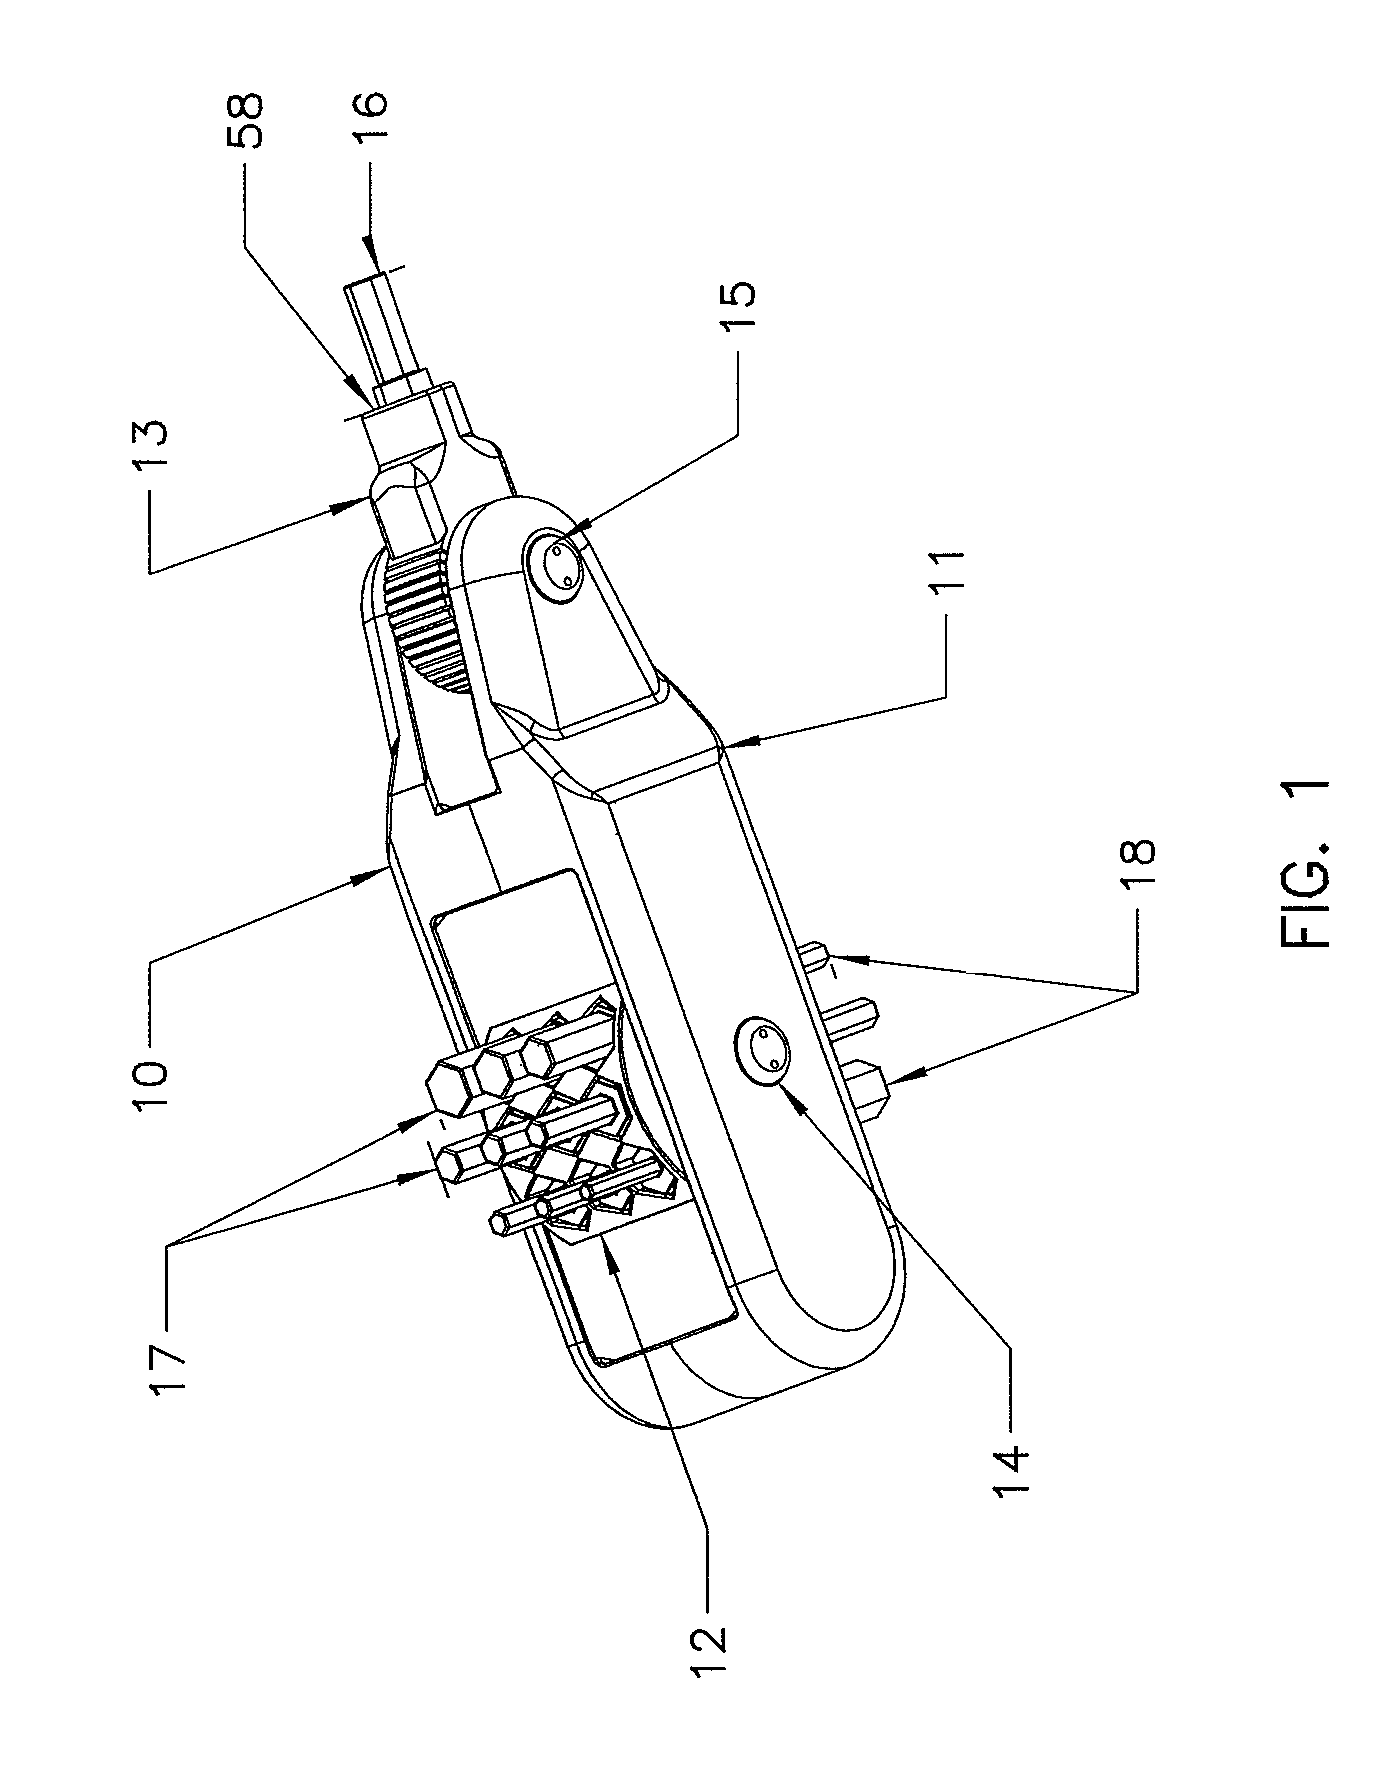 High density tool and locking system